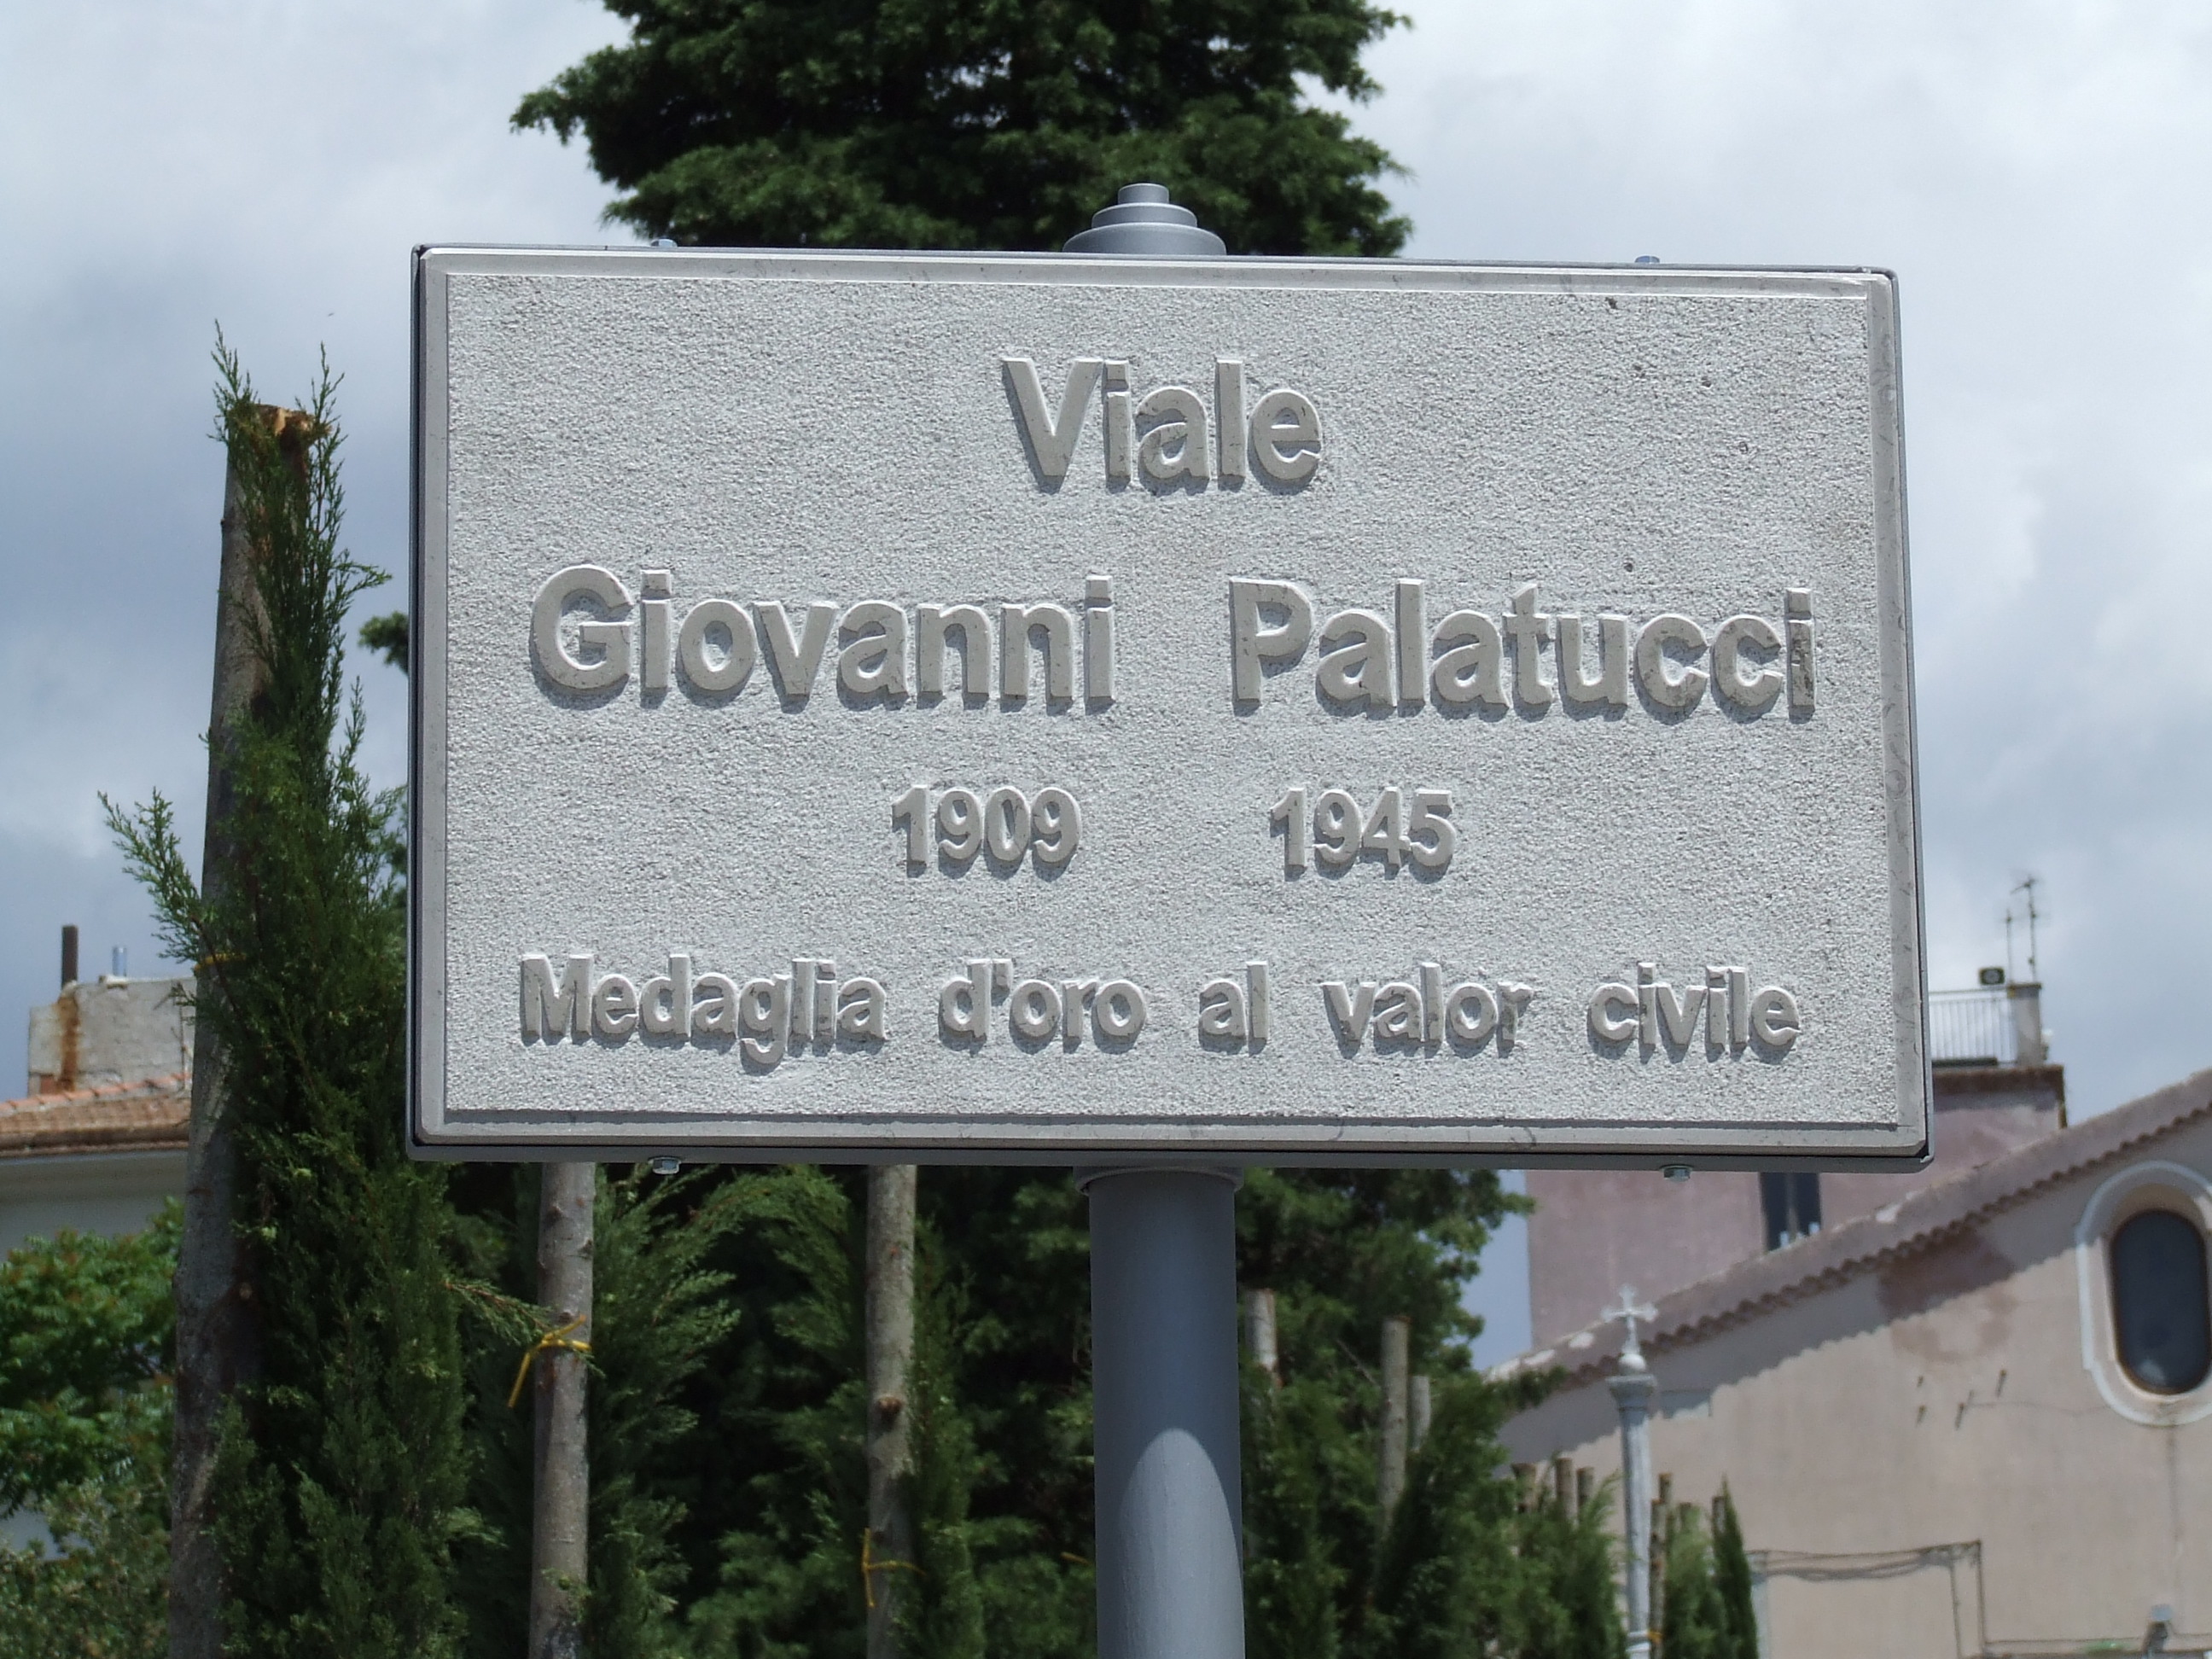 Viale Giovanni Palatucci - Italian police officer who saved Jews during the second world war